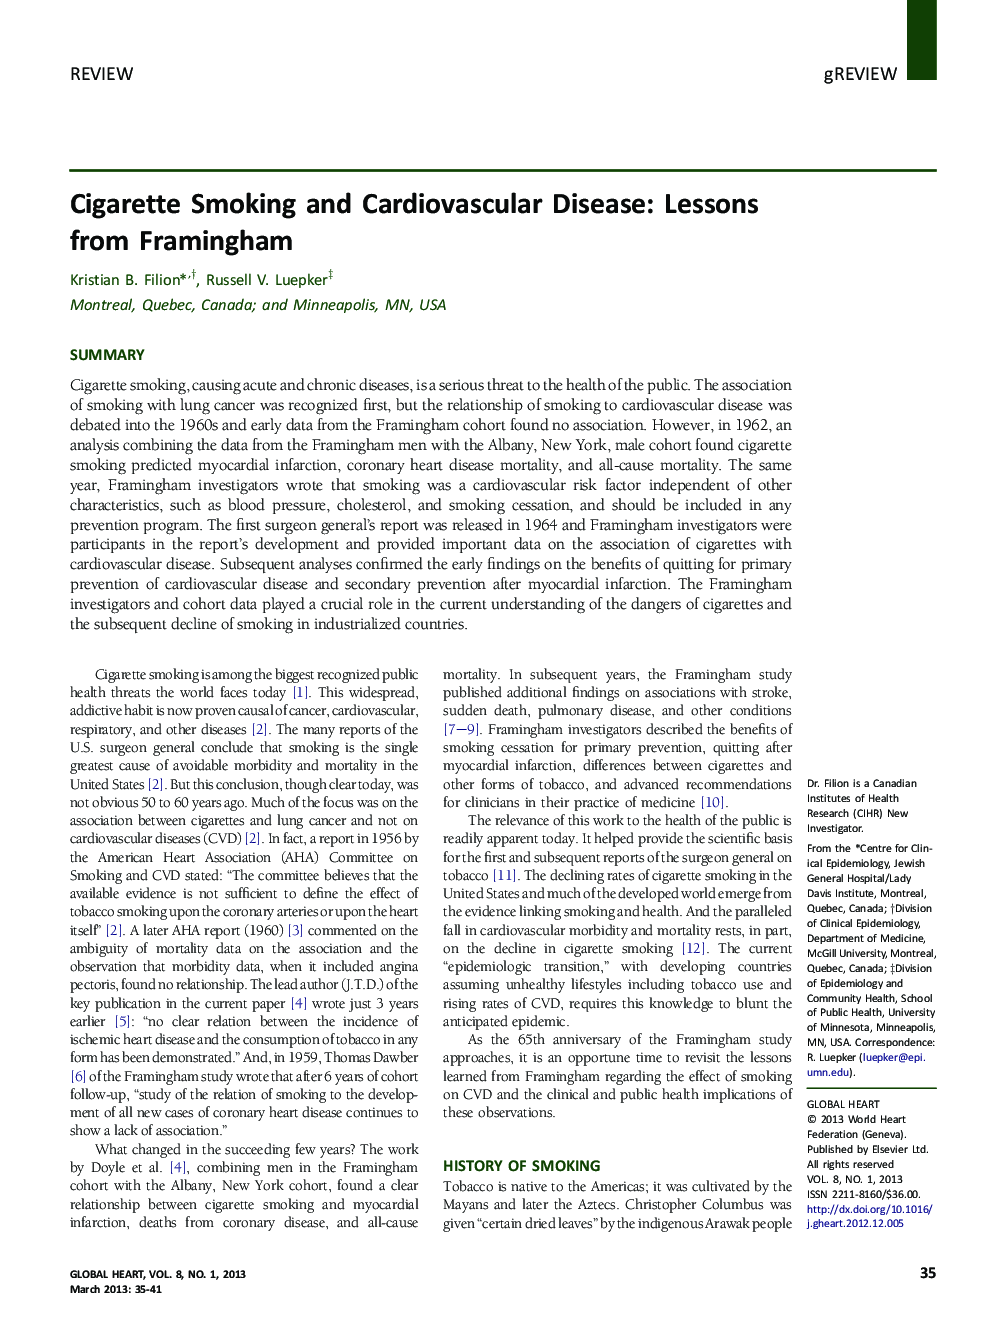 Cigarette Smoking and Cardiovascular Disease: Lessons from Framingham